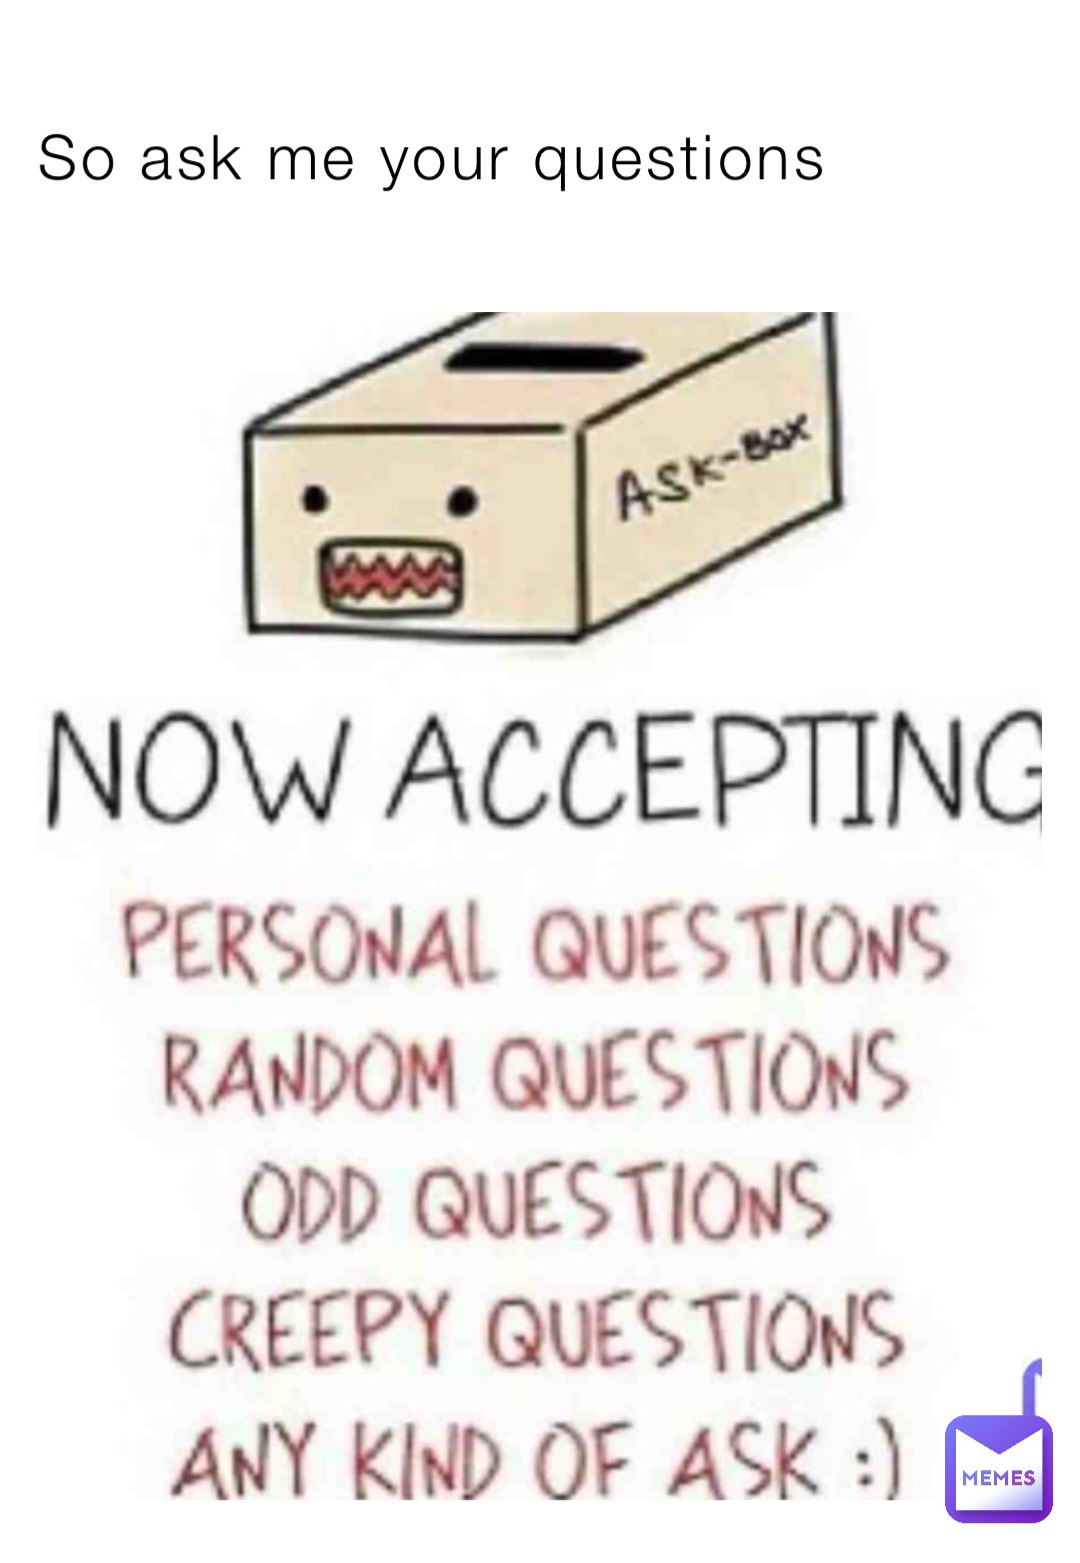 So ask me your questions